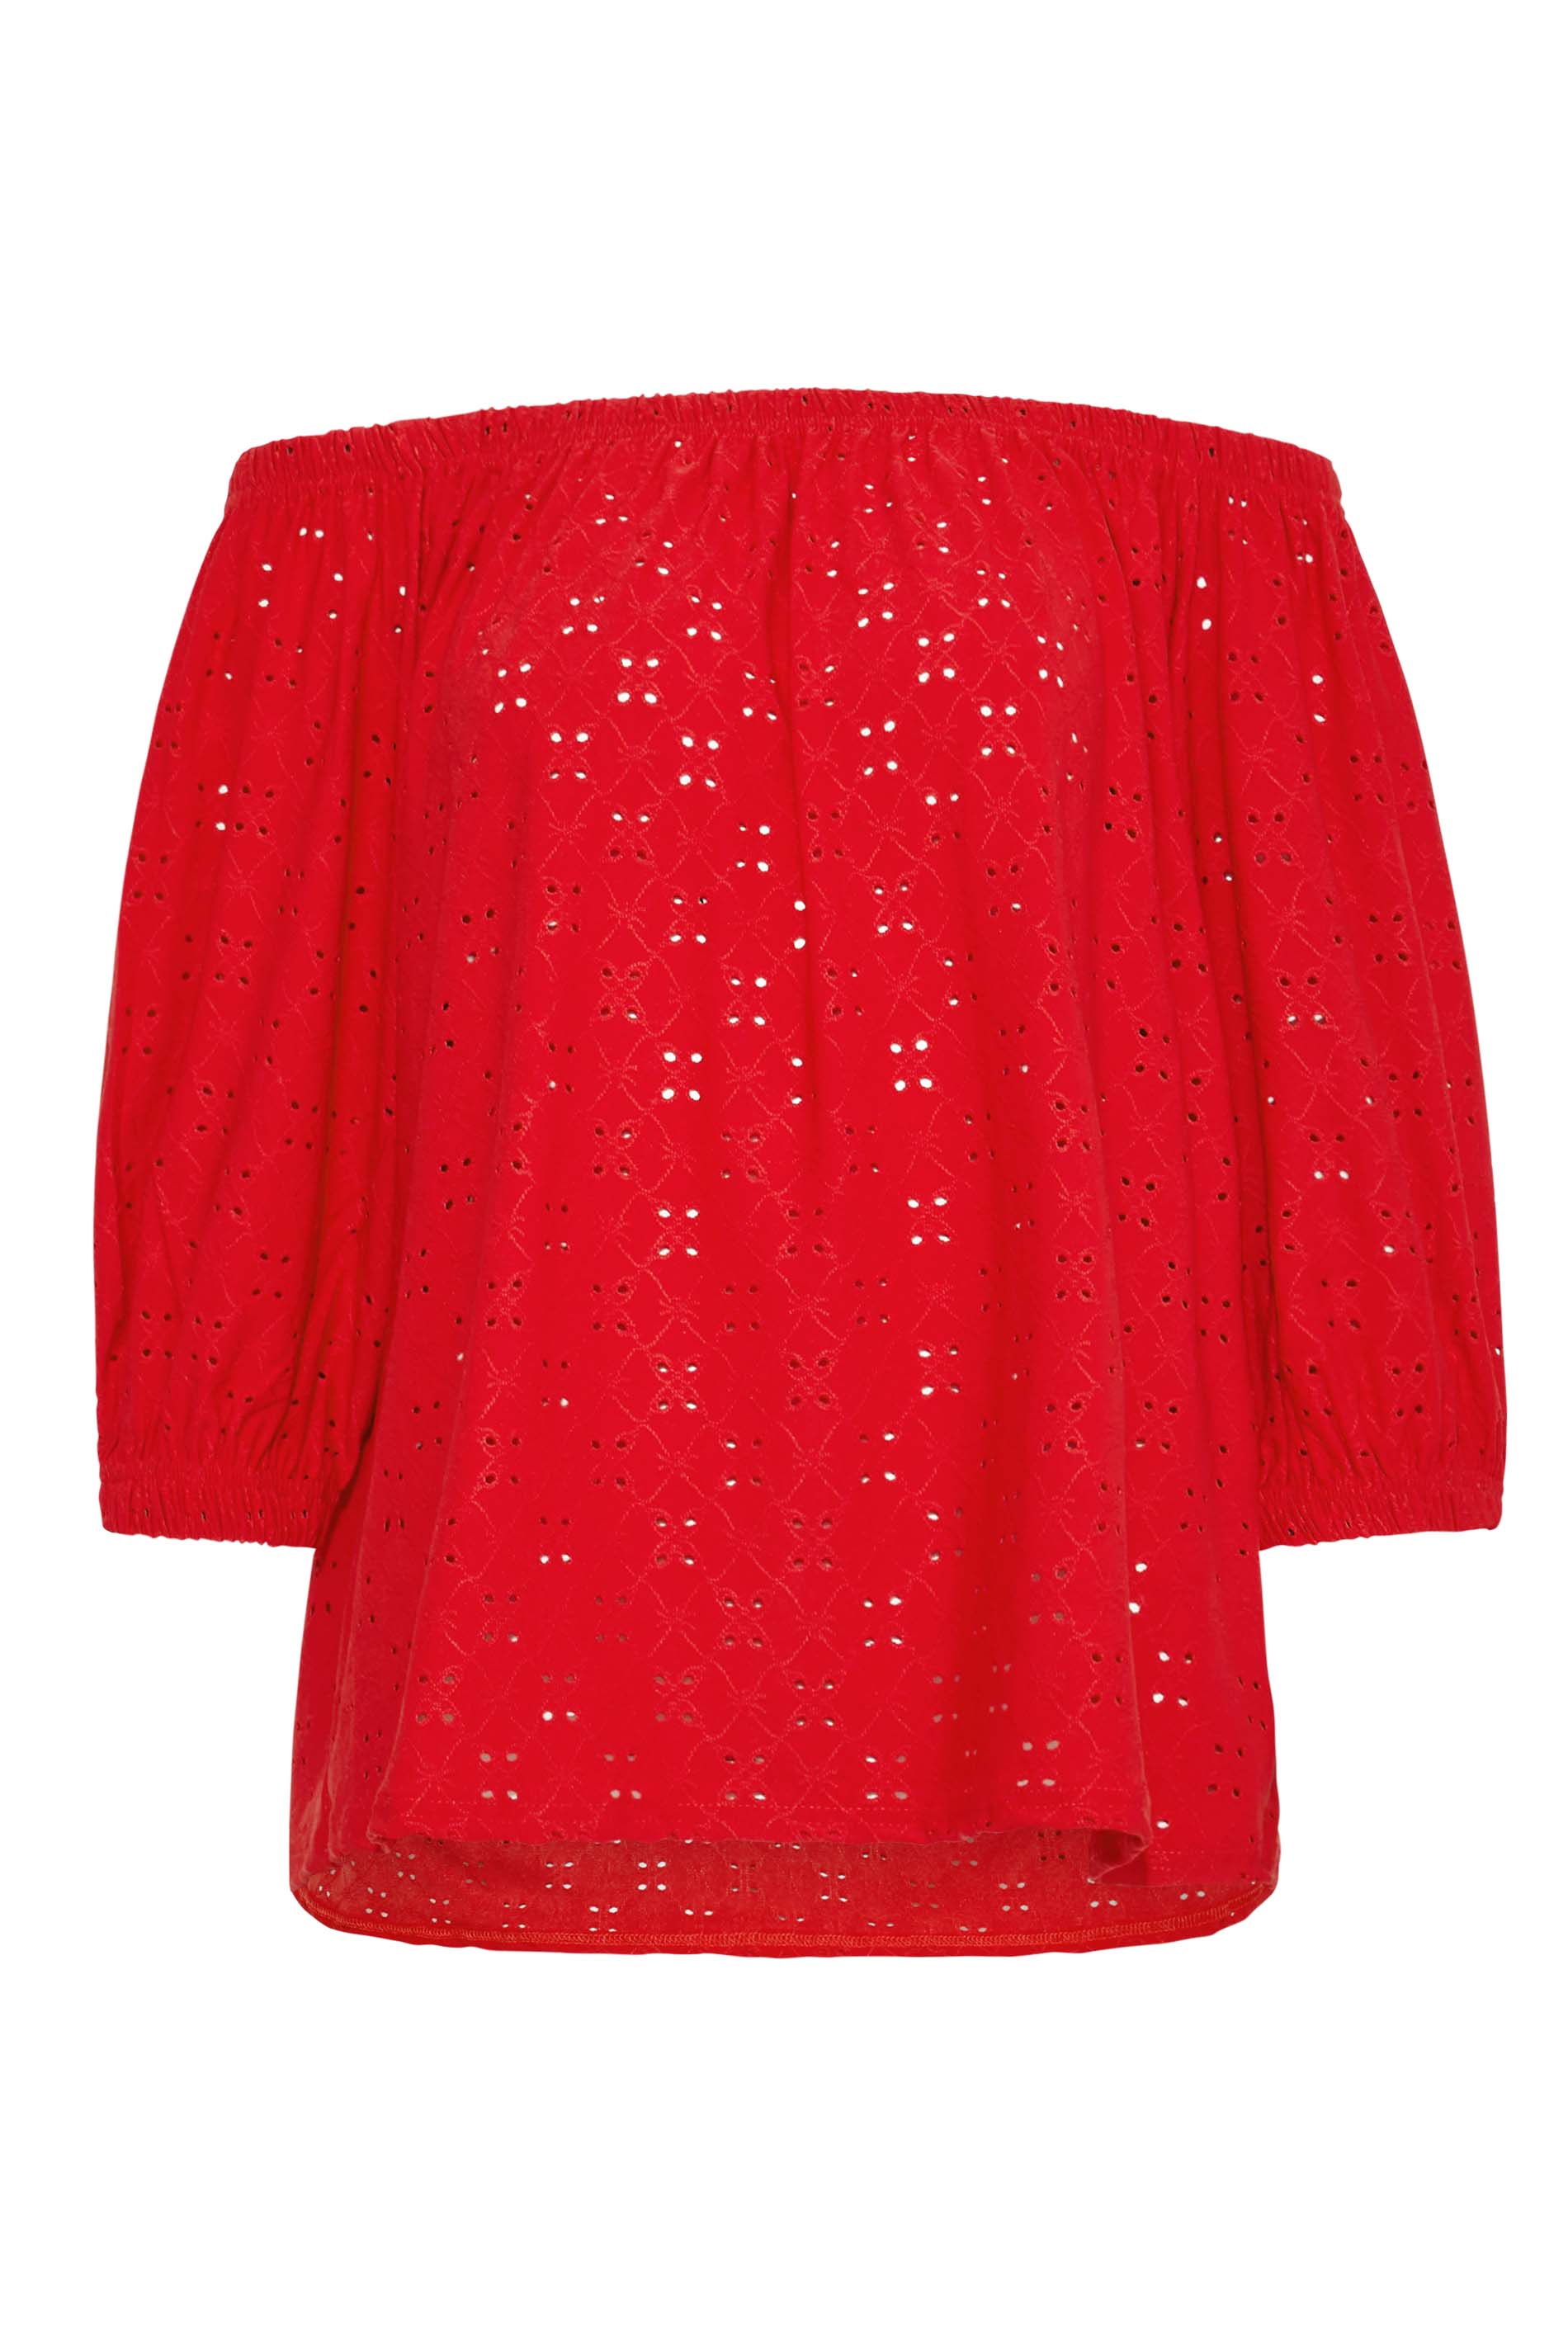 LTS Tall Women's Red Broderie Anglaise Bardot Top | Long Tall Sally